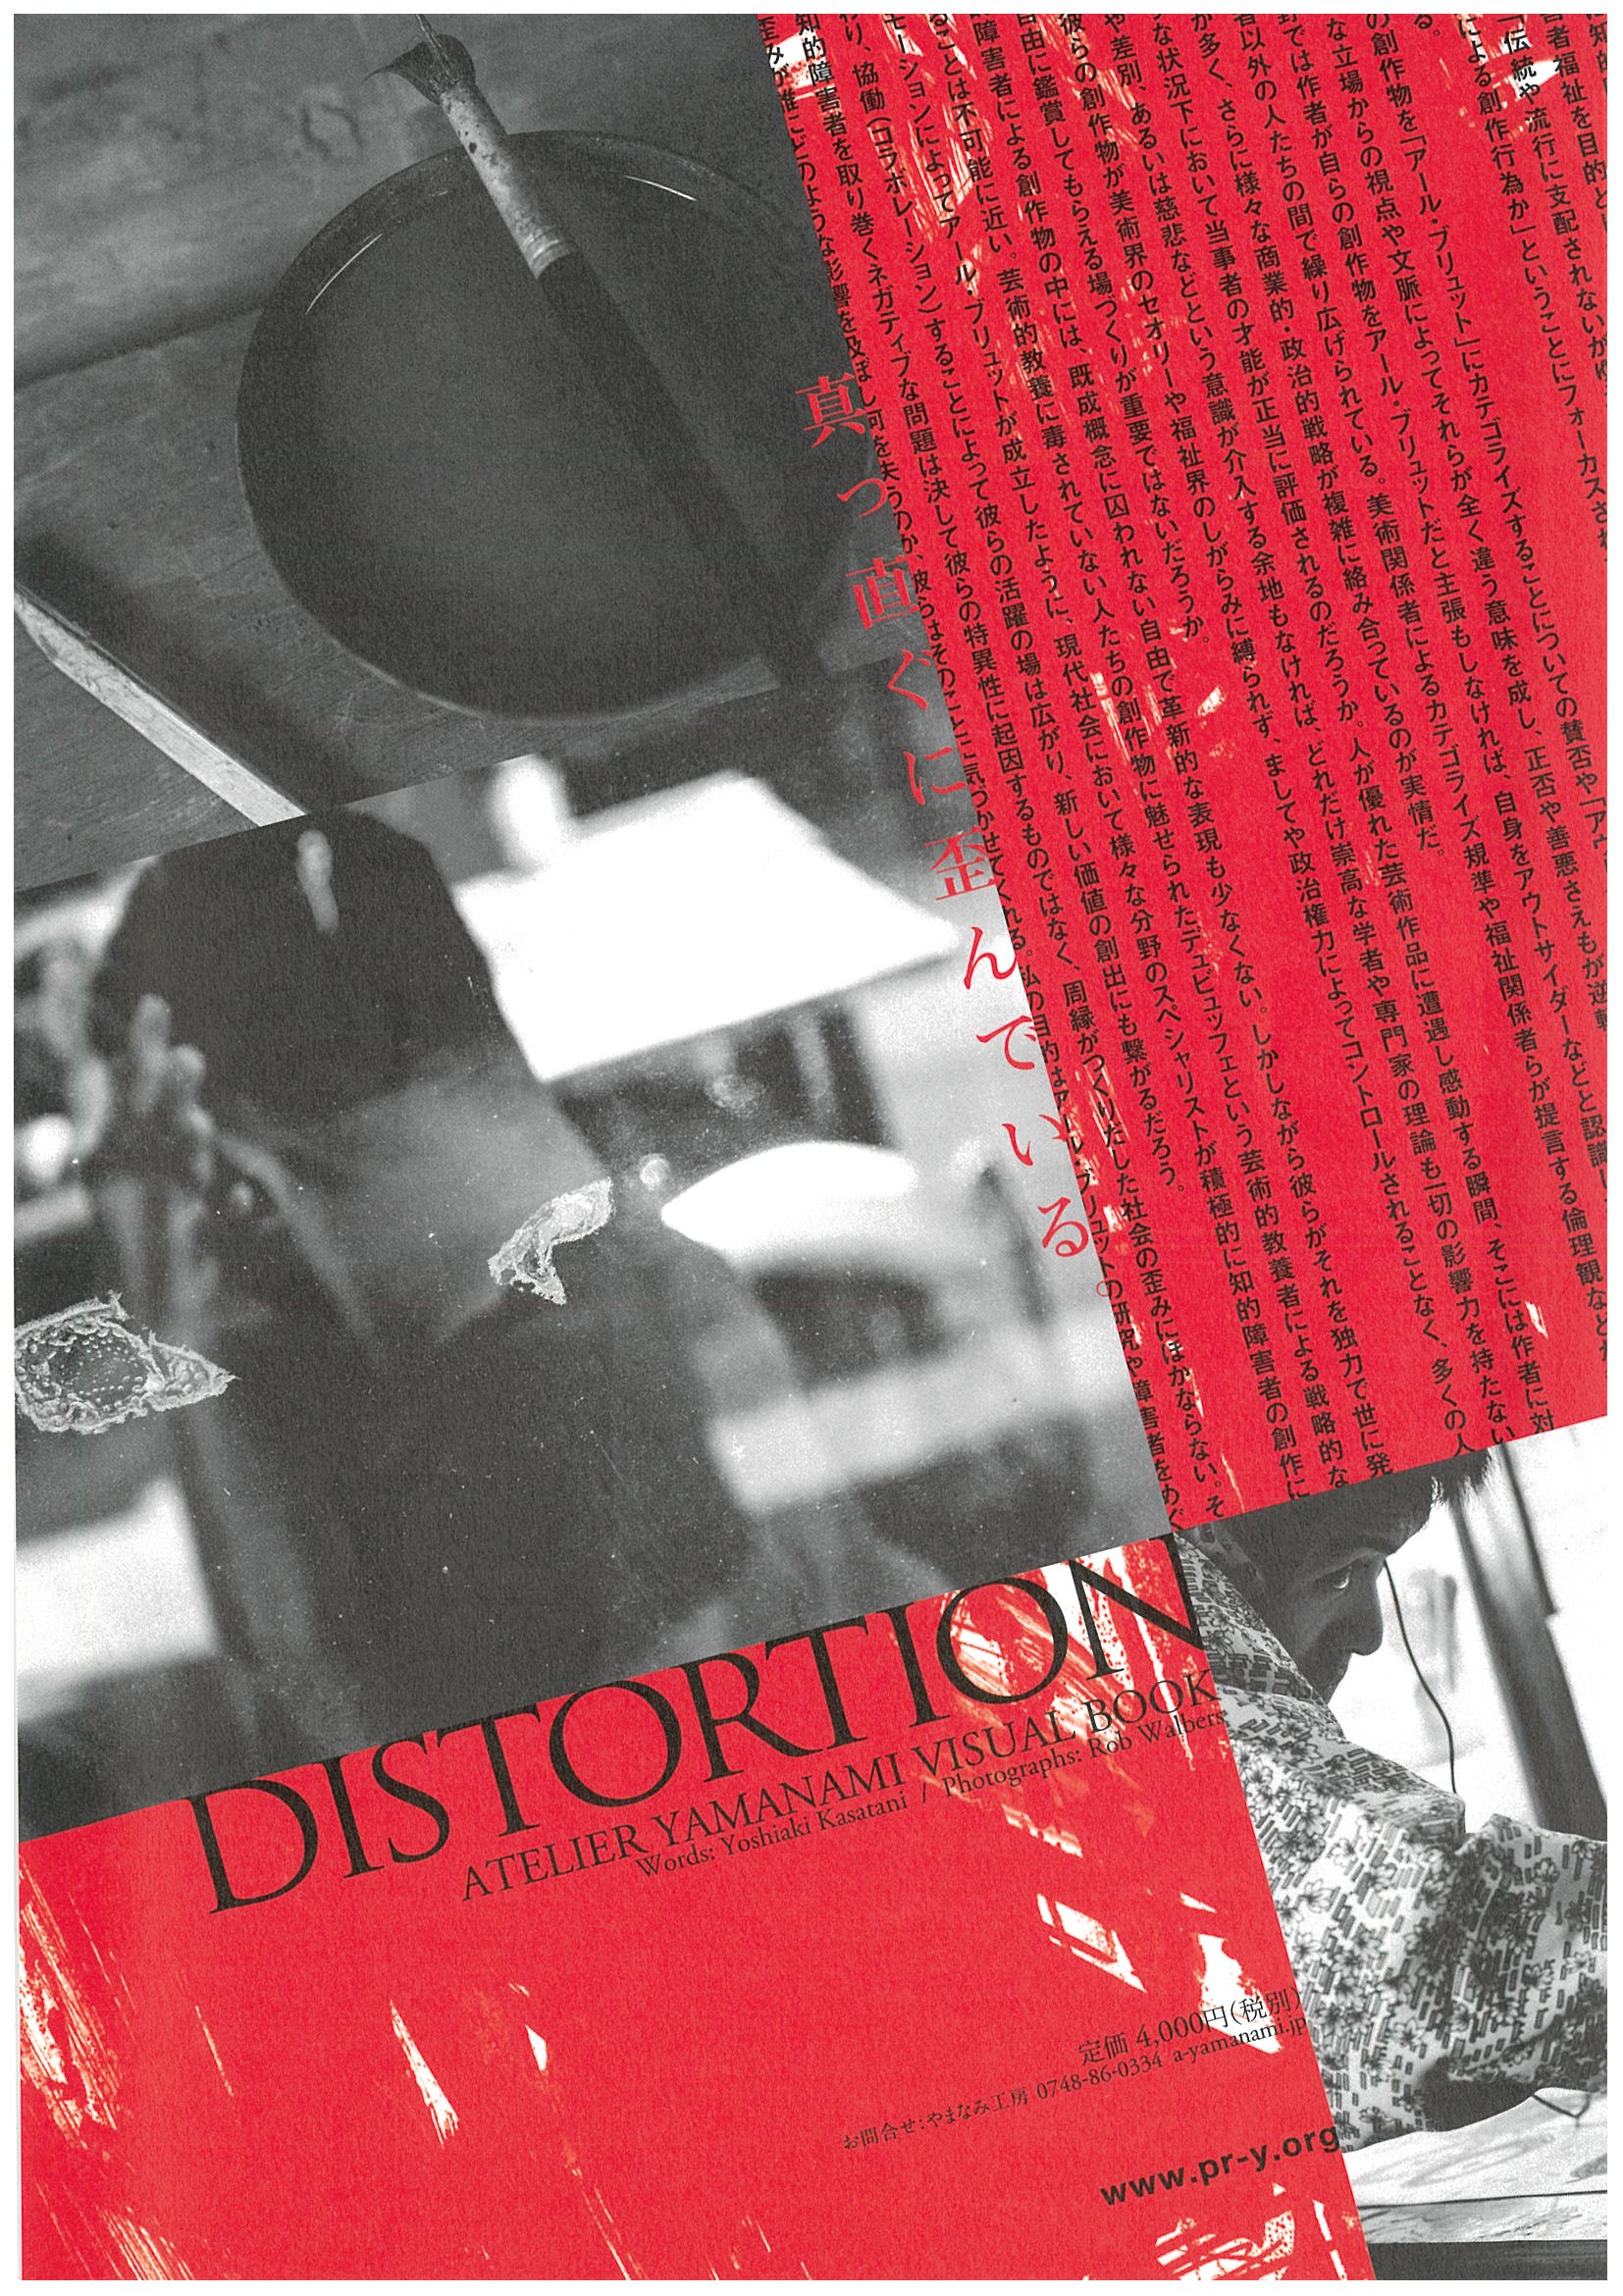 ATERIER YAMANAMI VISUAL BOOK「DISTORTION」